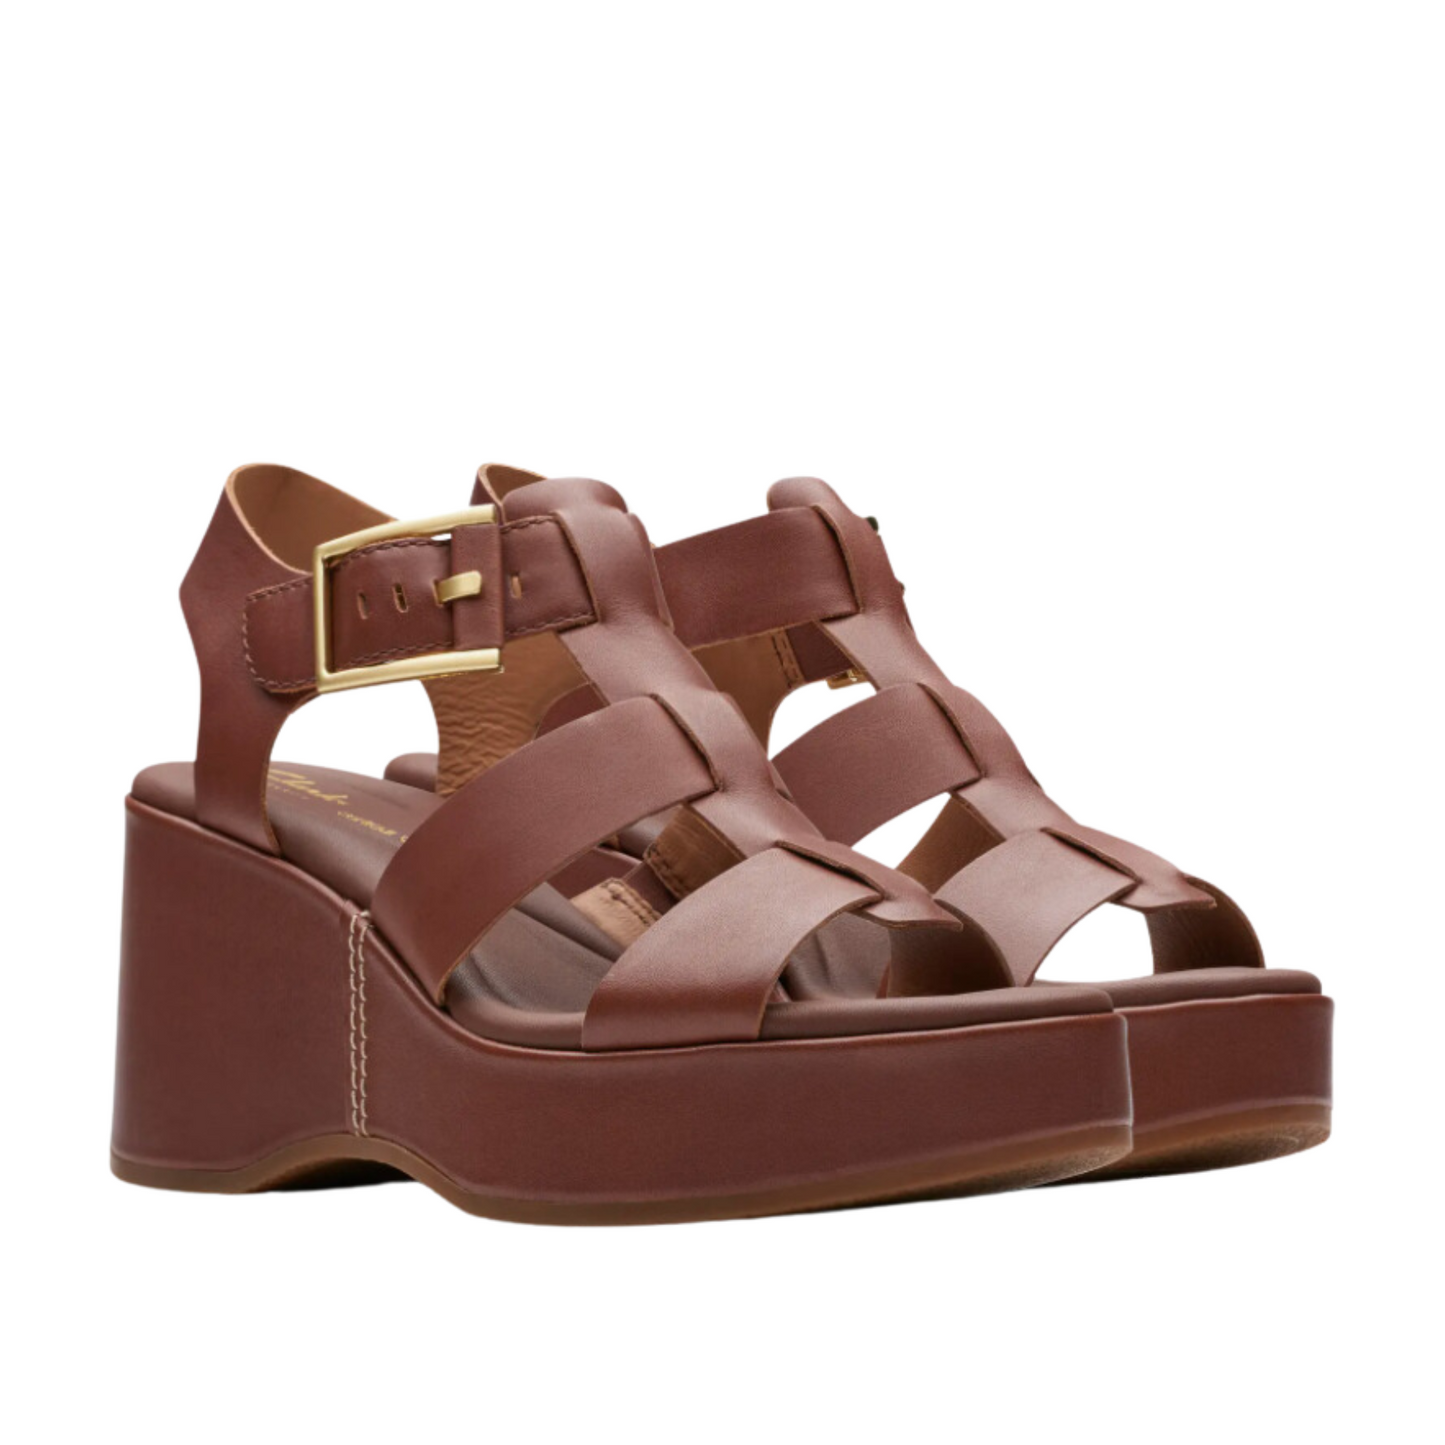 The tan leather Manon Cove Wedge Sandals from Clarks